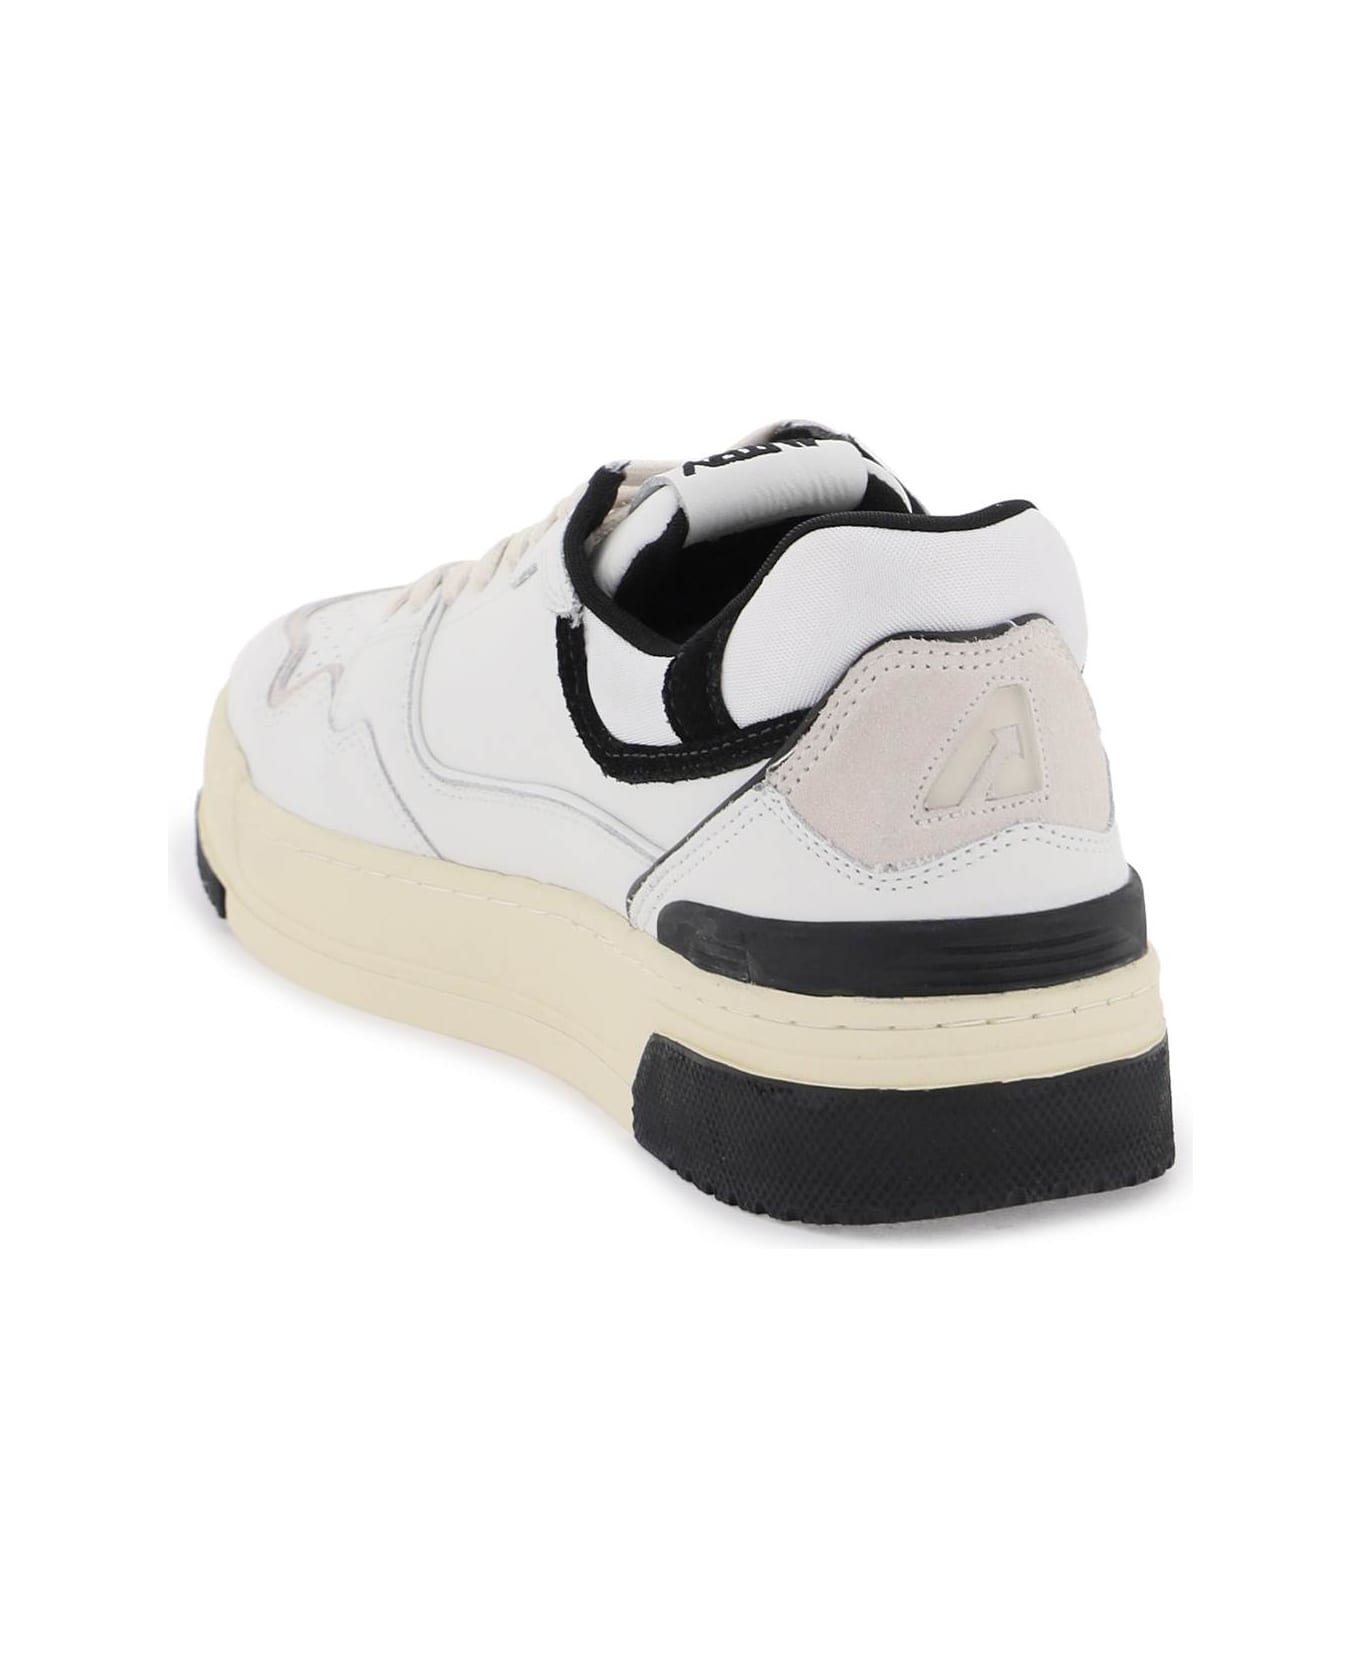 Autry Clc Sneakers In White And Black Leather - White